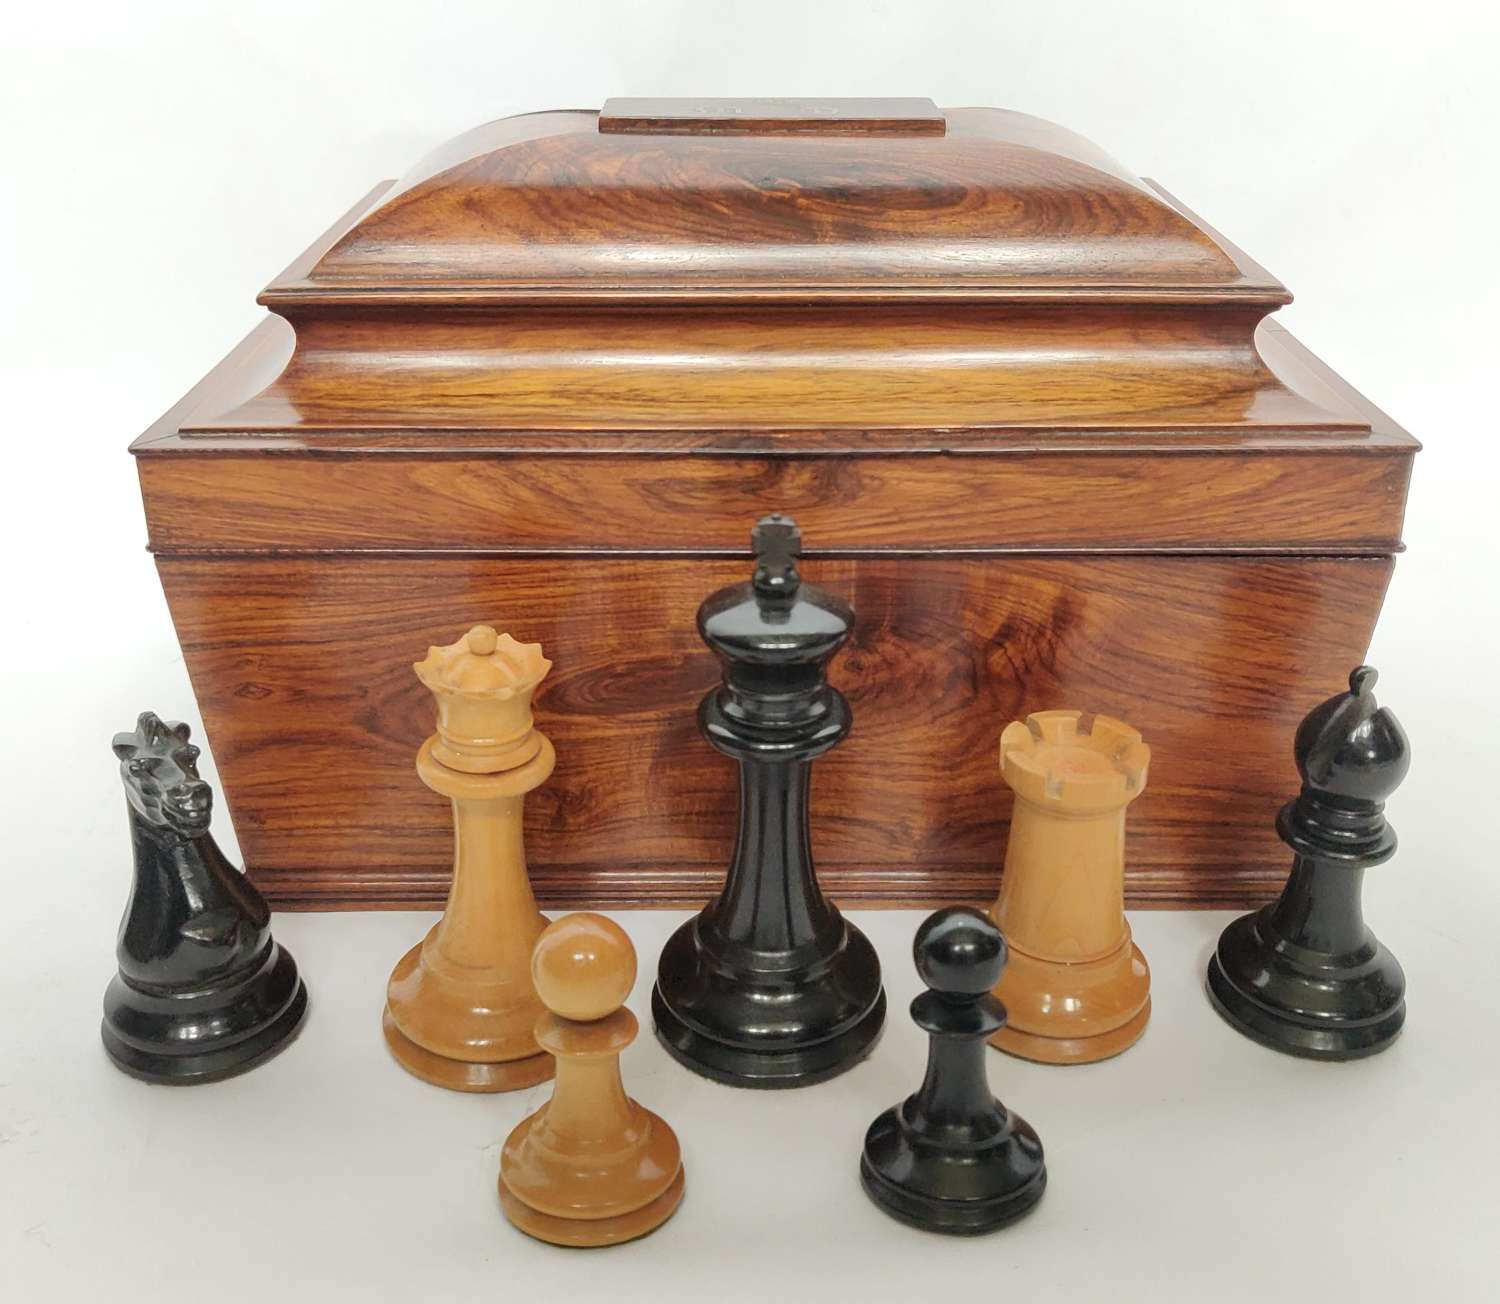 Rare Jaques Chess Set with Commissioned Box